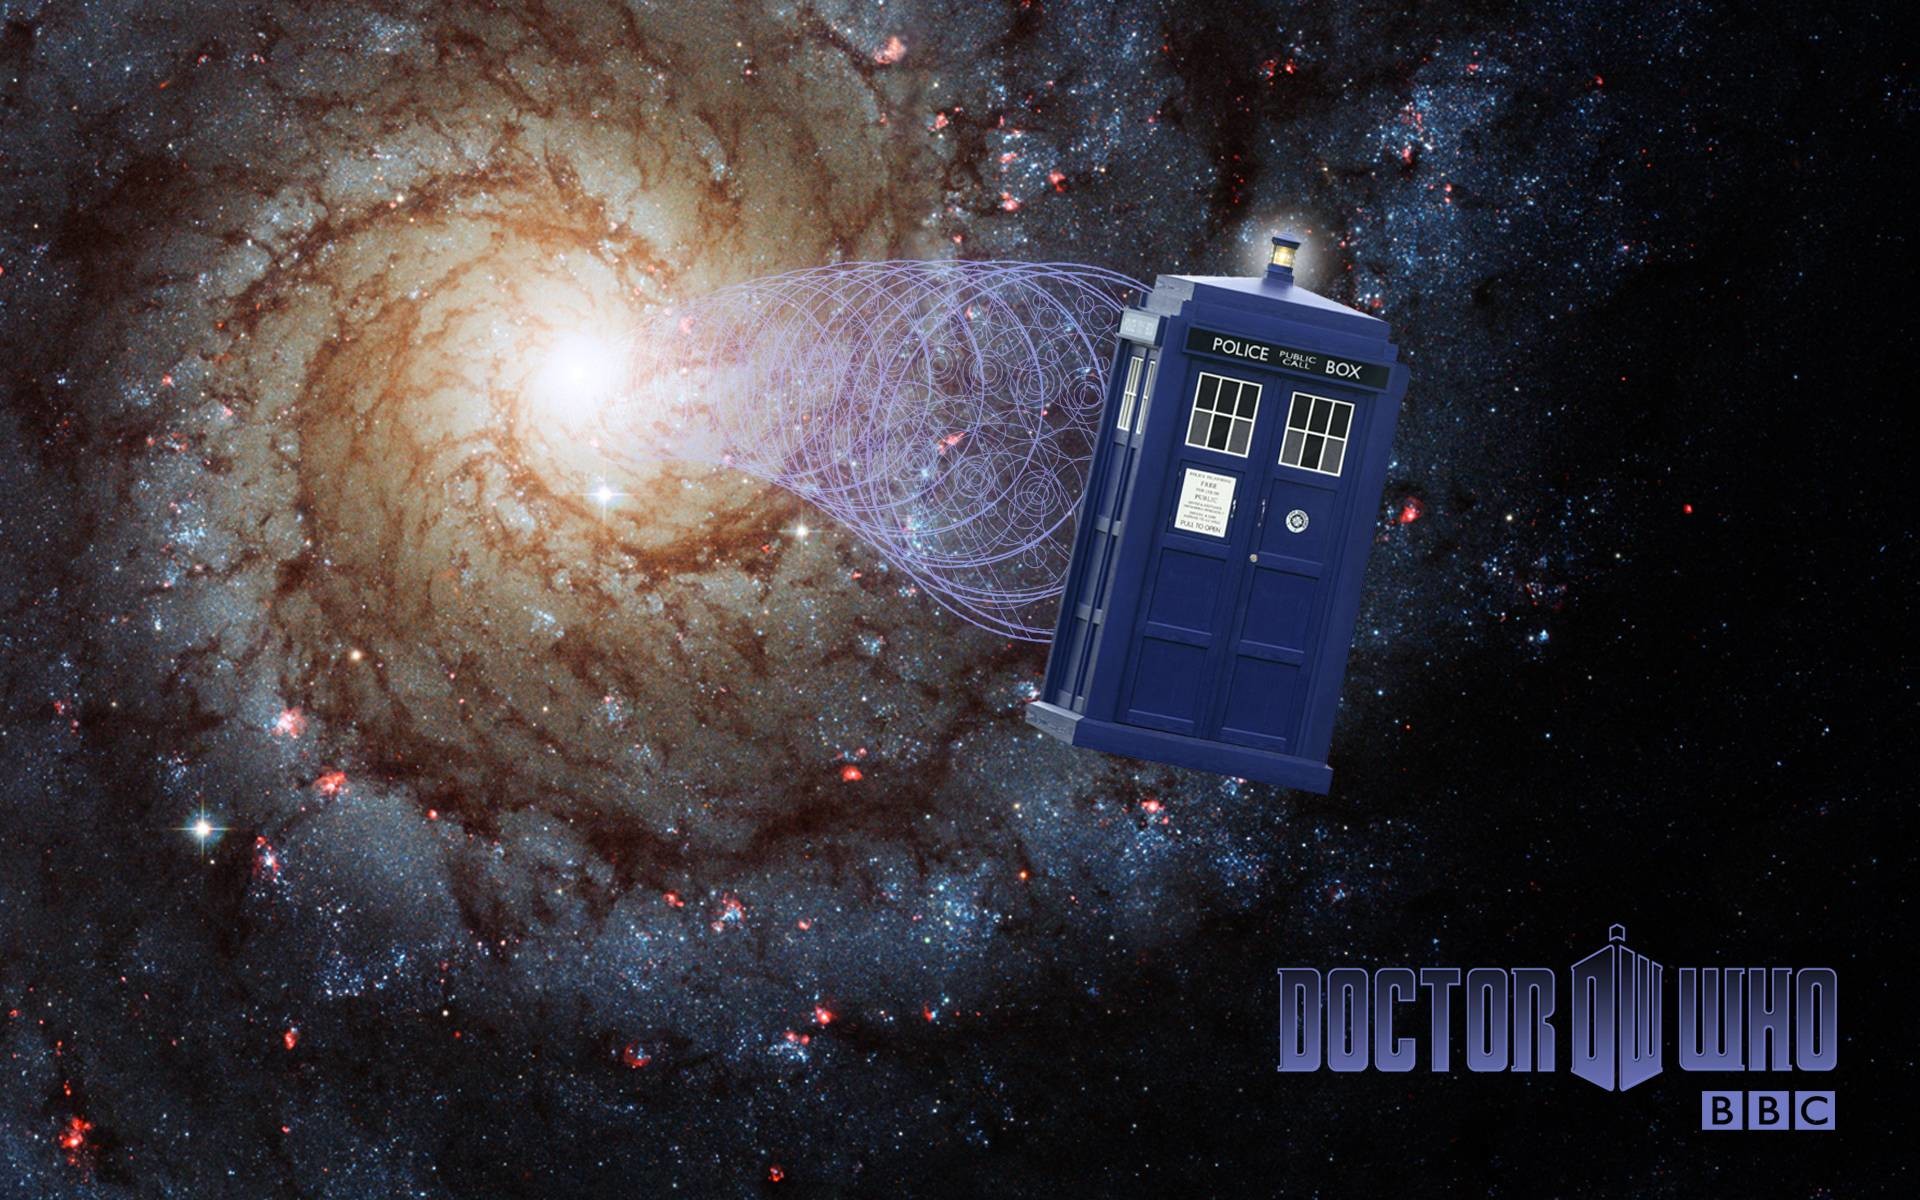 Doctor Who Wallpapers Tardis doctor who wallpaper HD free